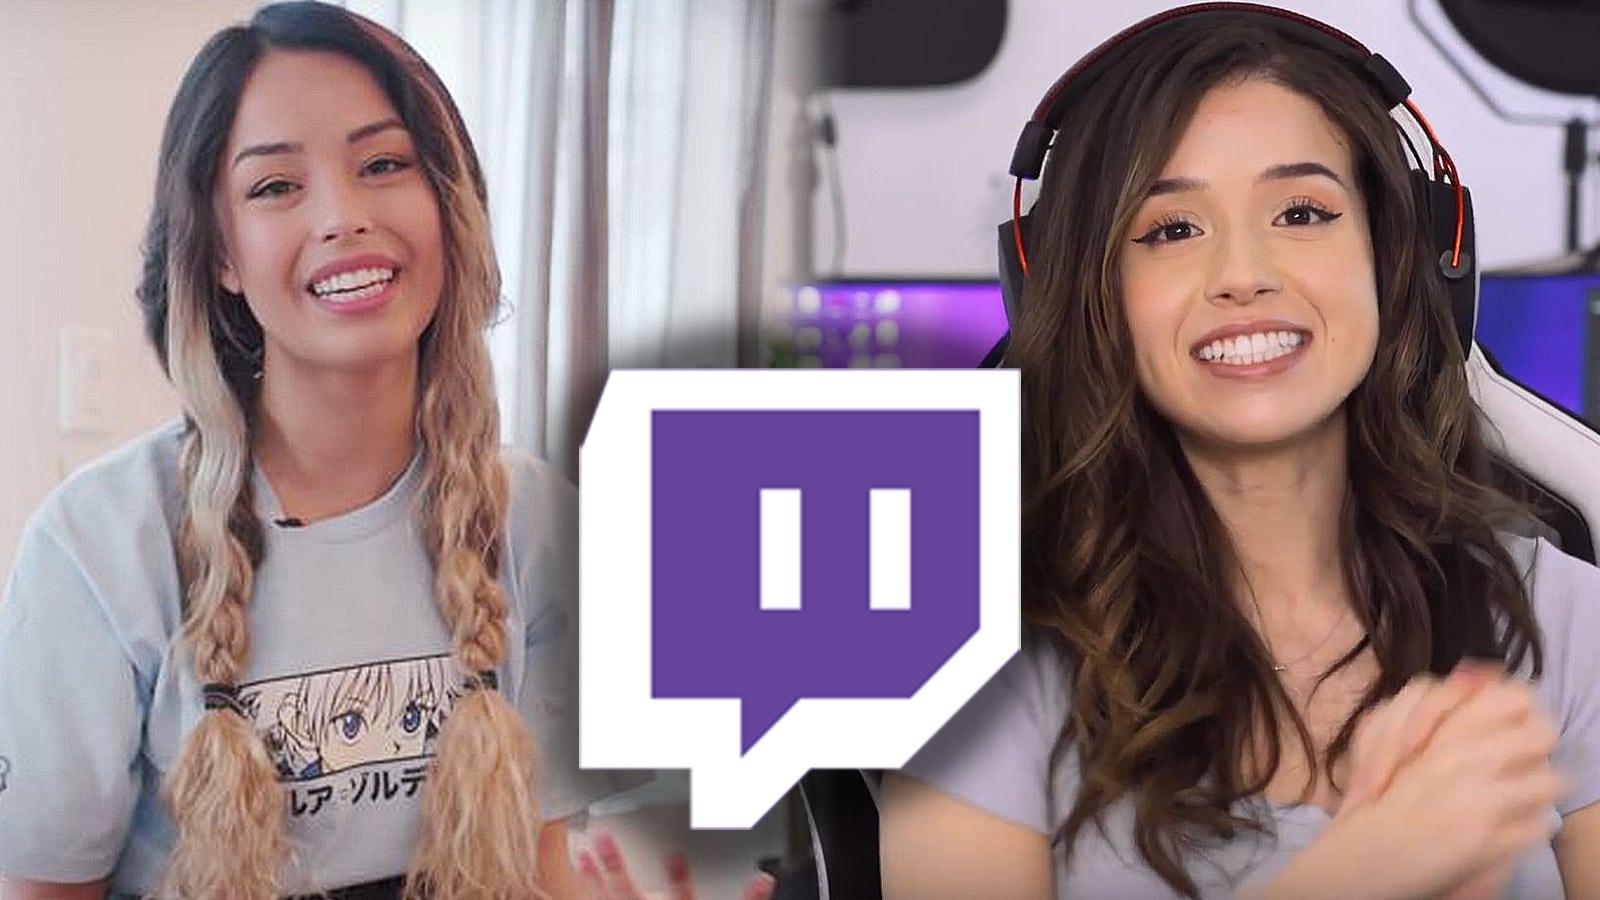 Pokimane and Valkyrae smile for a photo with the Twitch logo shown in front of them.